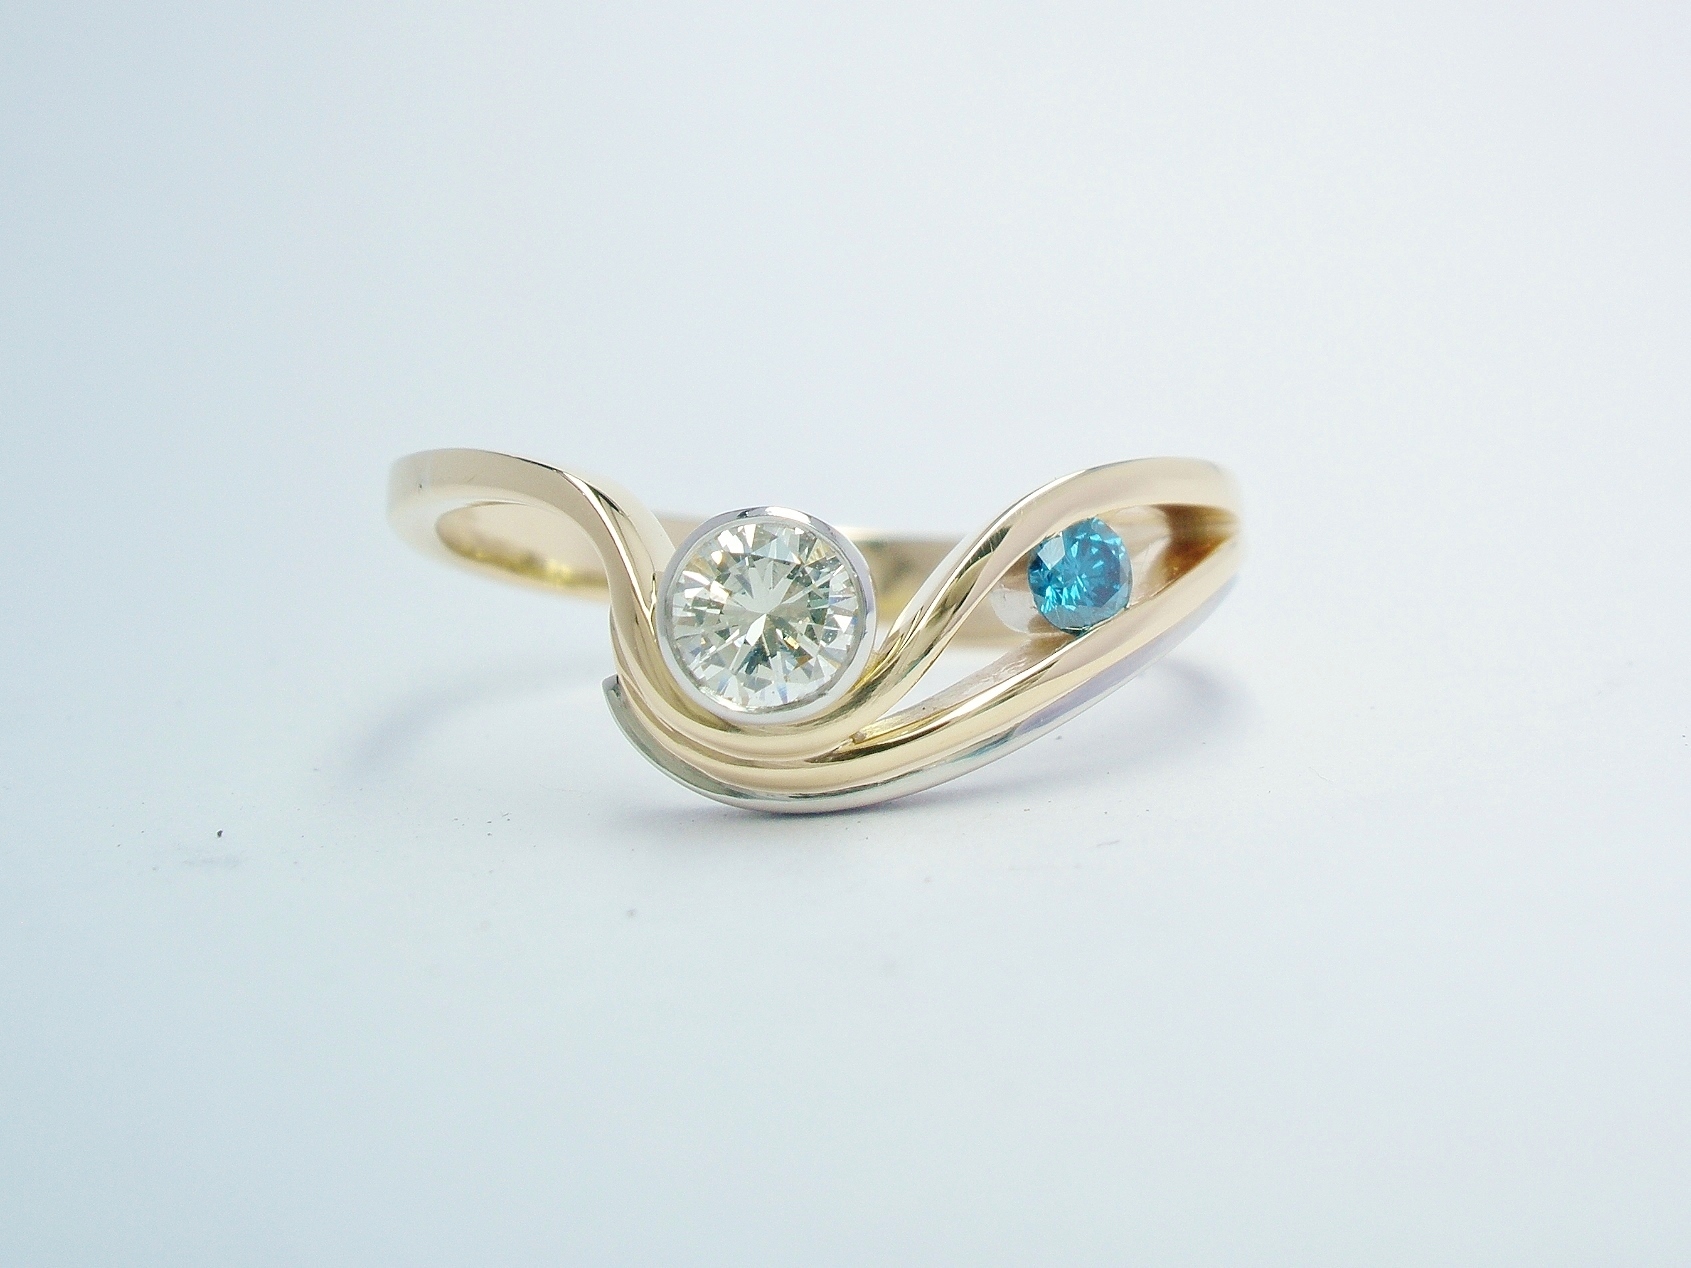 An ocean blue and white 2 stone round brilliant cut diamond 'wave' style ring mounted in 18ct. yellow gold and platinum.